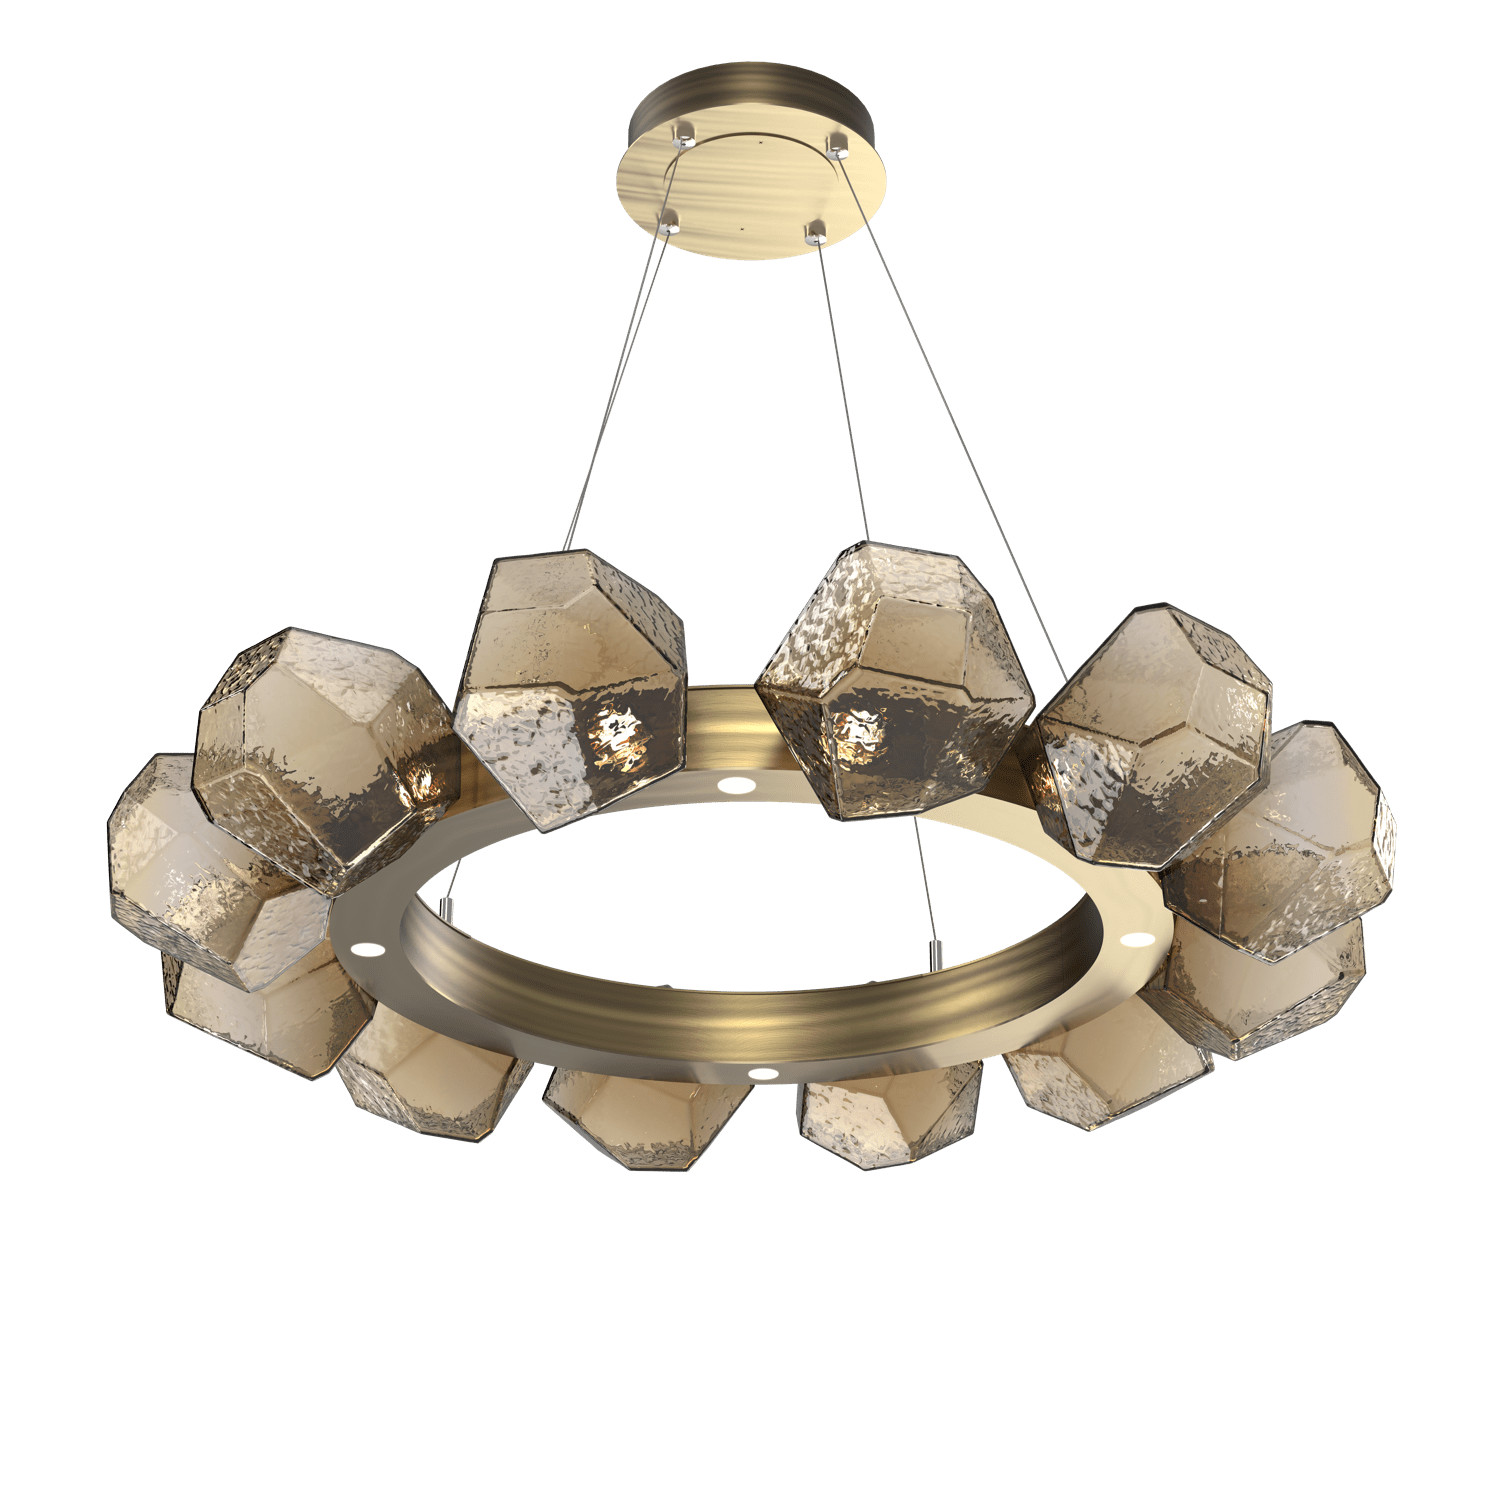 CHB0039-36-HB-B-Hammerton-Studio-Gem-36-inch-radial-ring-chandelier-with-heritage-brass-finish-and-bronze-blown-glass-shades-and-LED-lamping